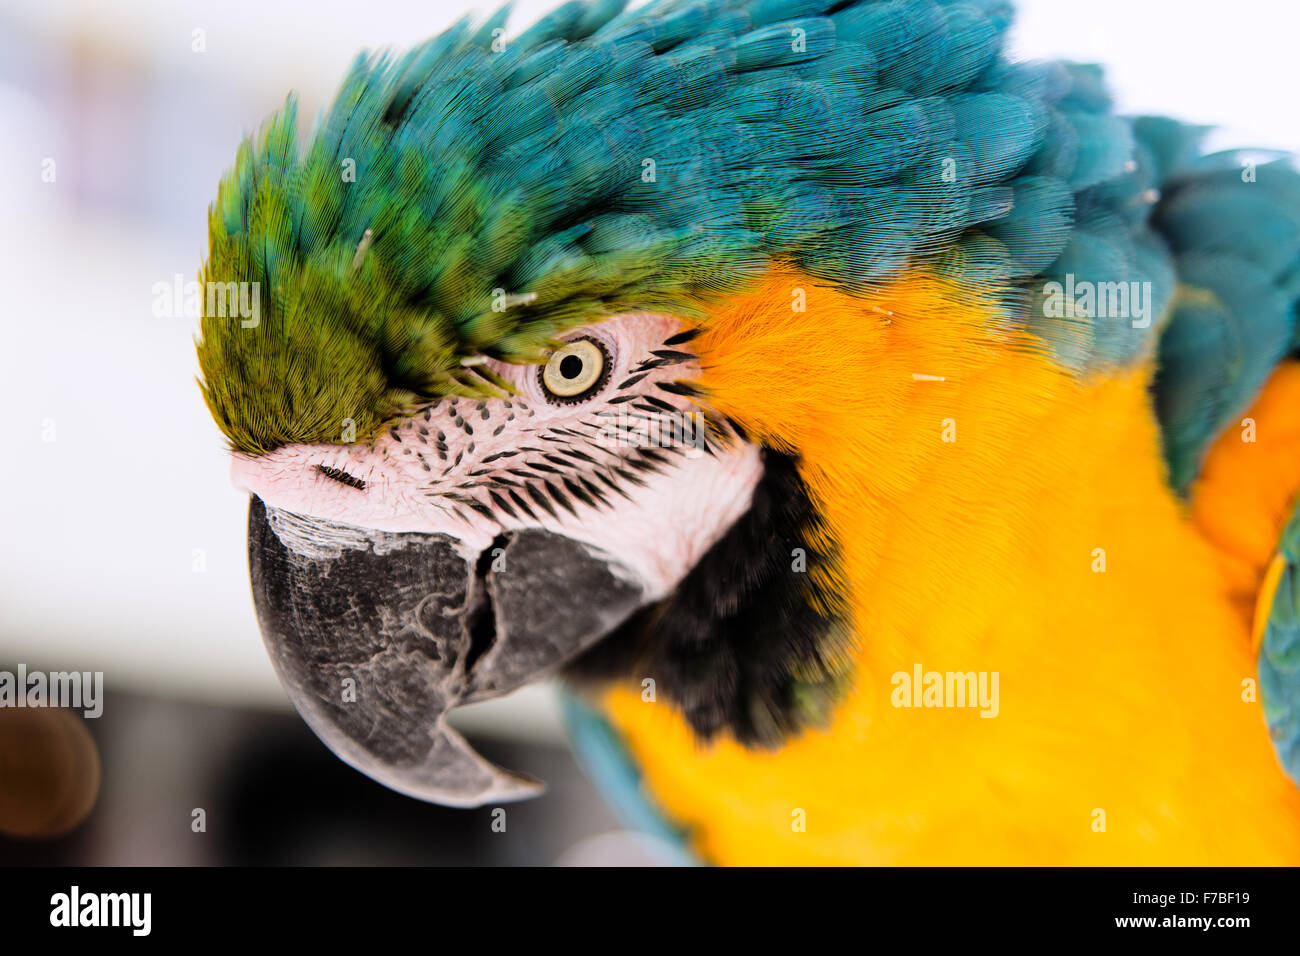 Large parrot stares one eye on the photographer Stock Photo